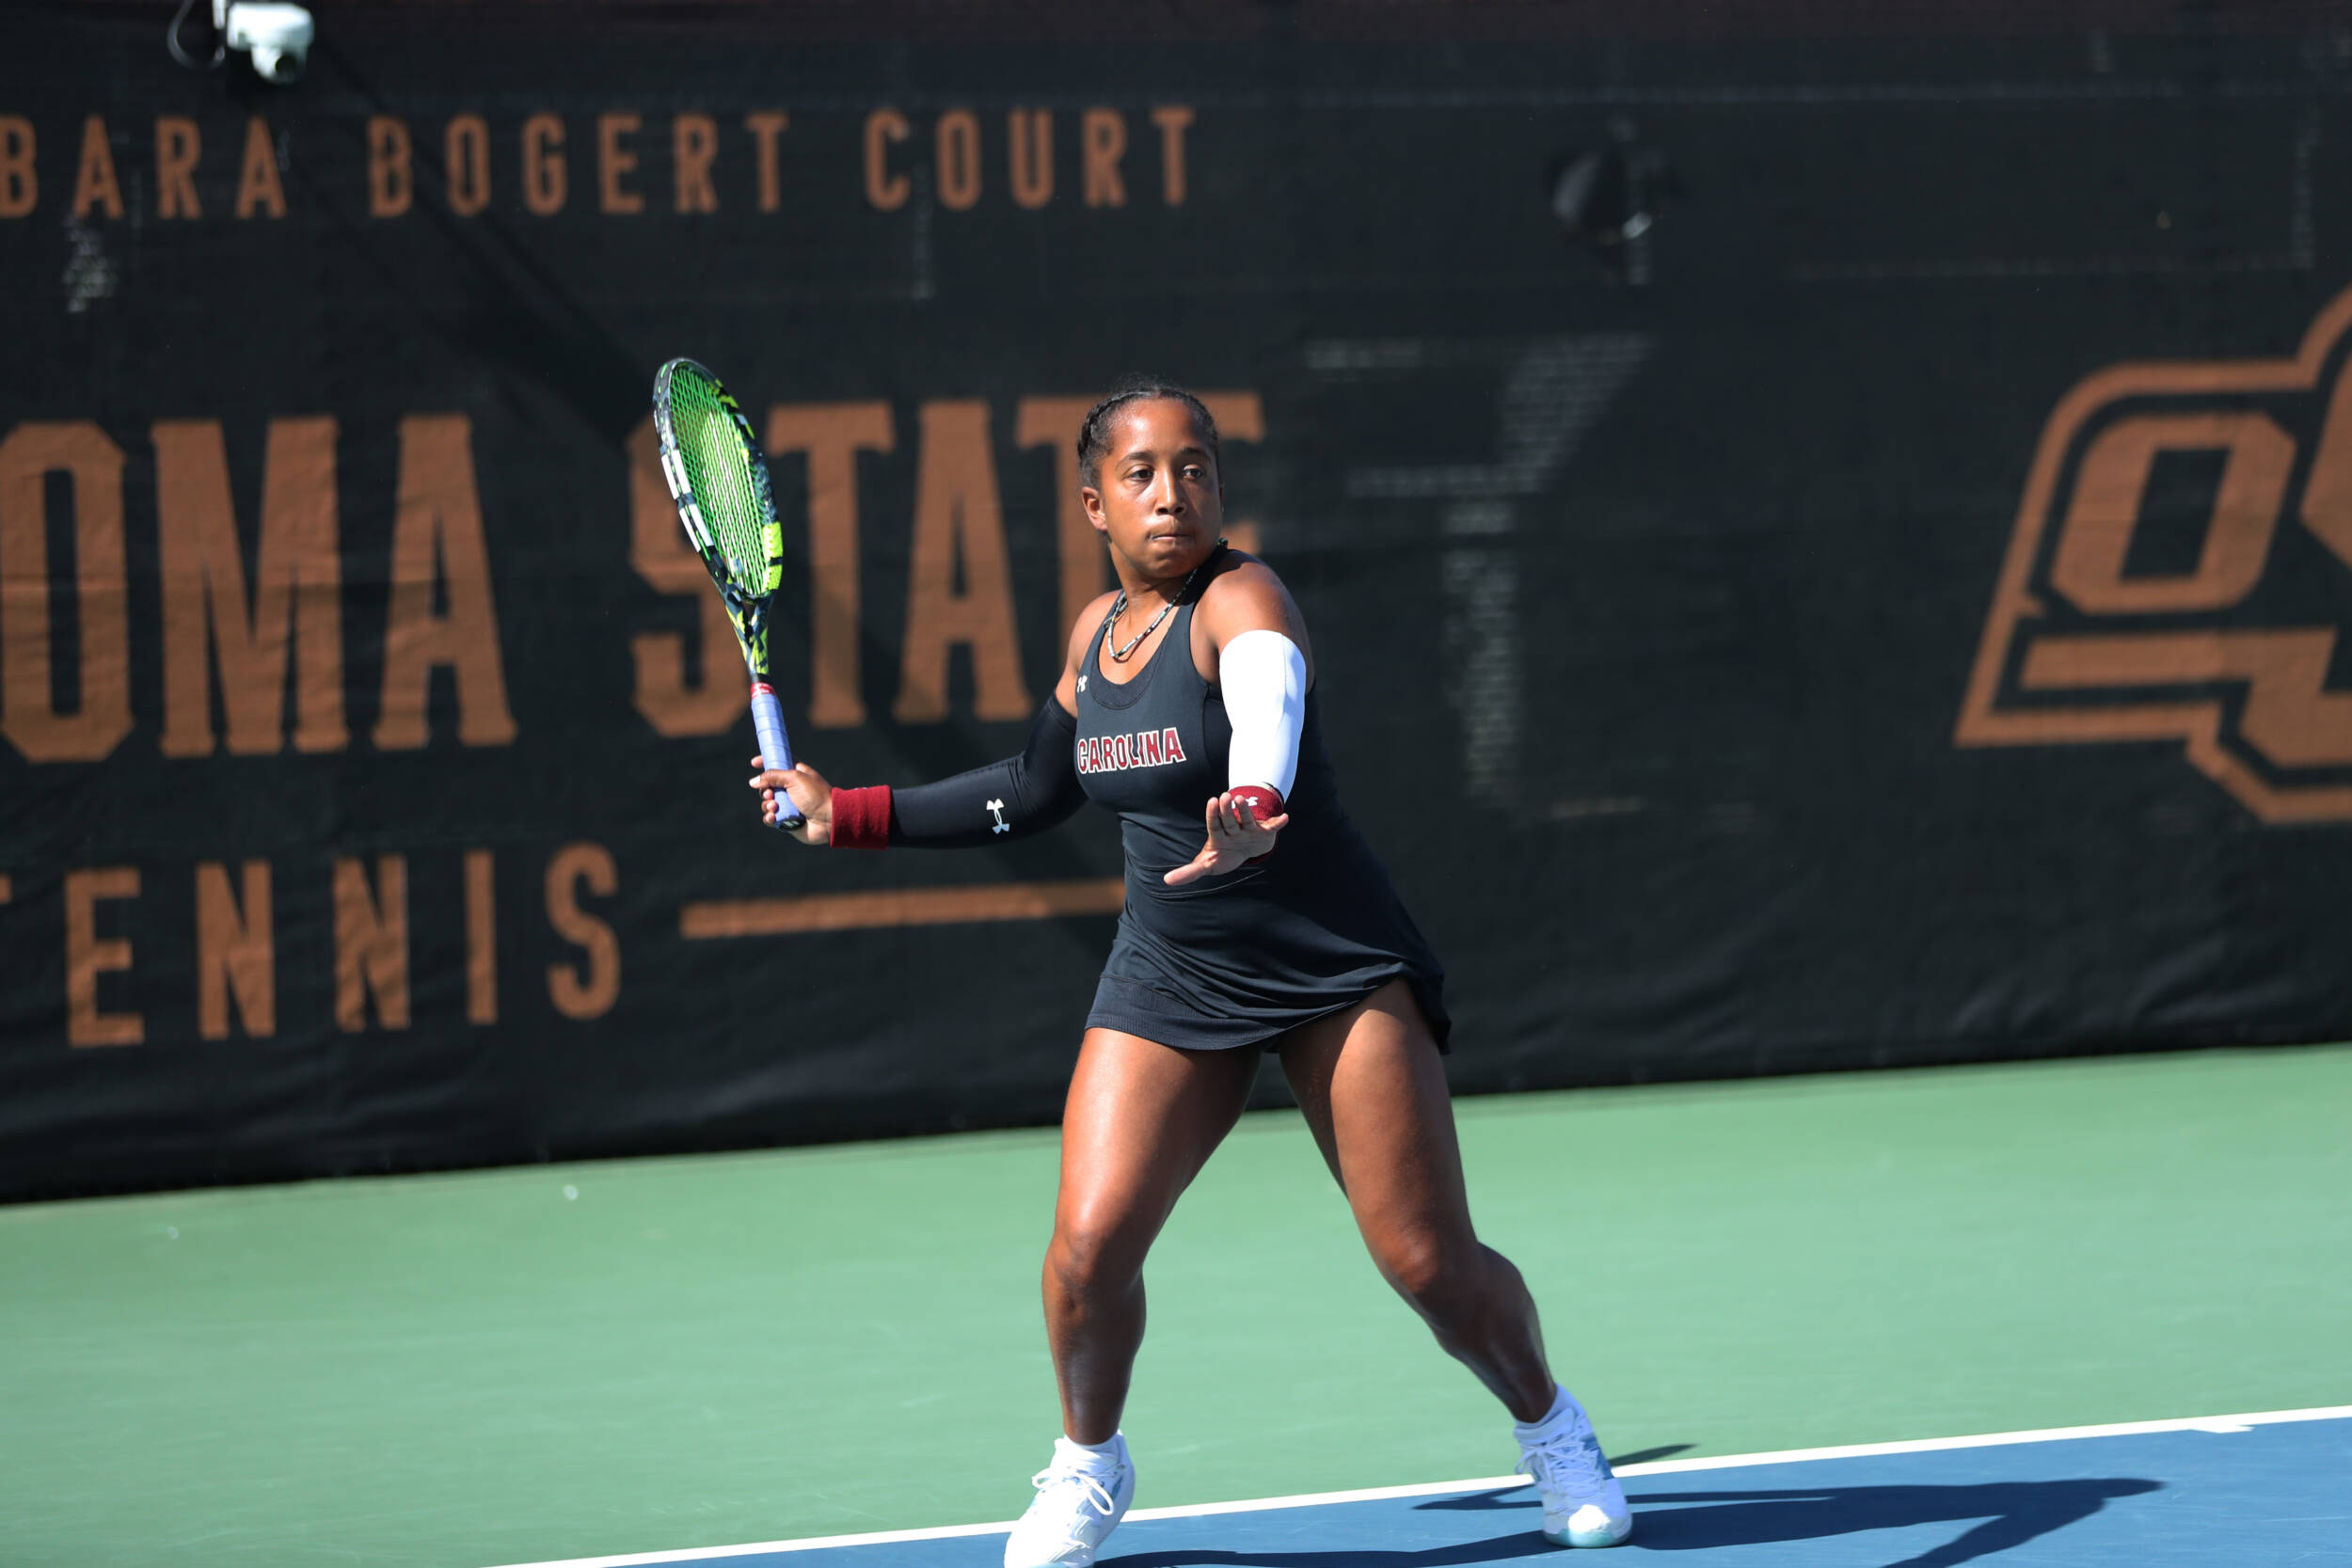 Akli and Hamner Conclude Season in NCAA Doubles Tournament